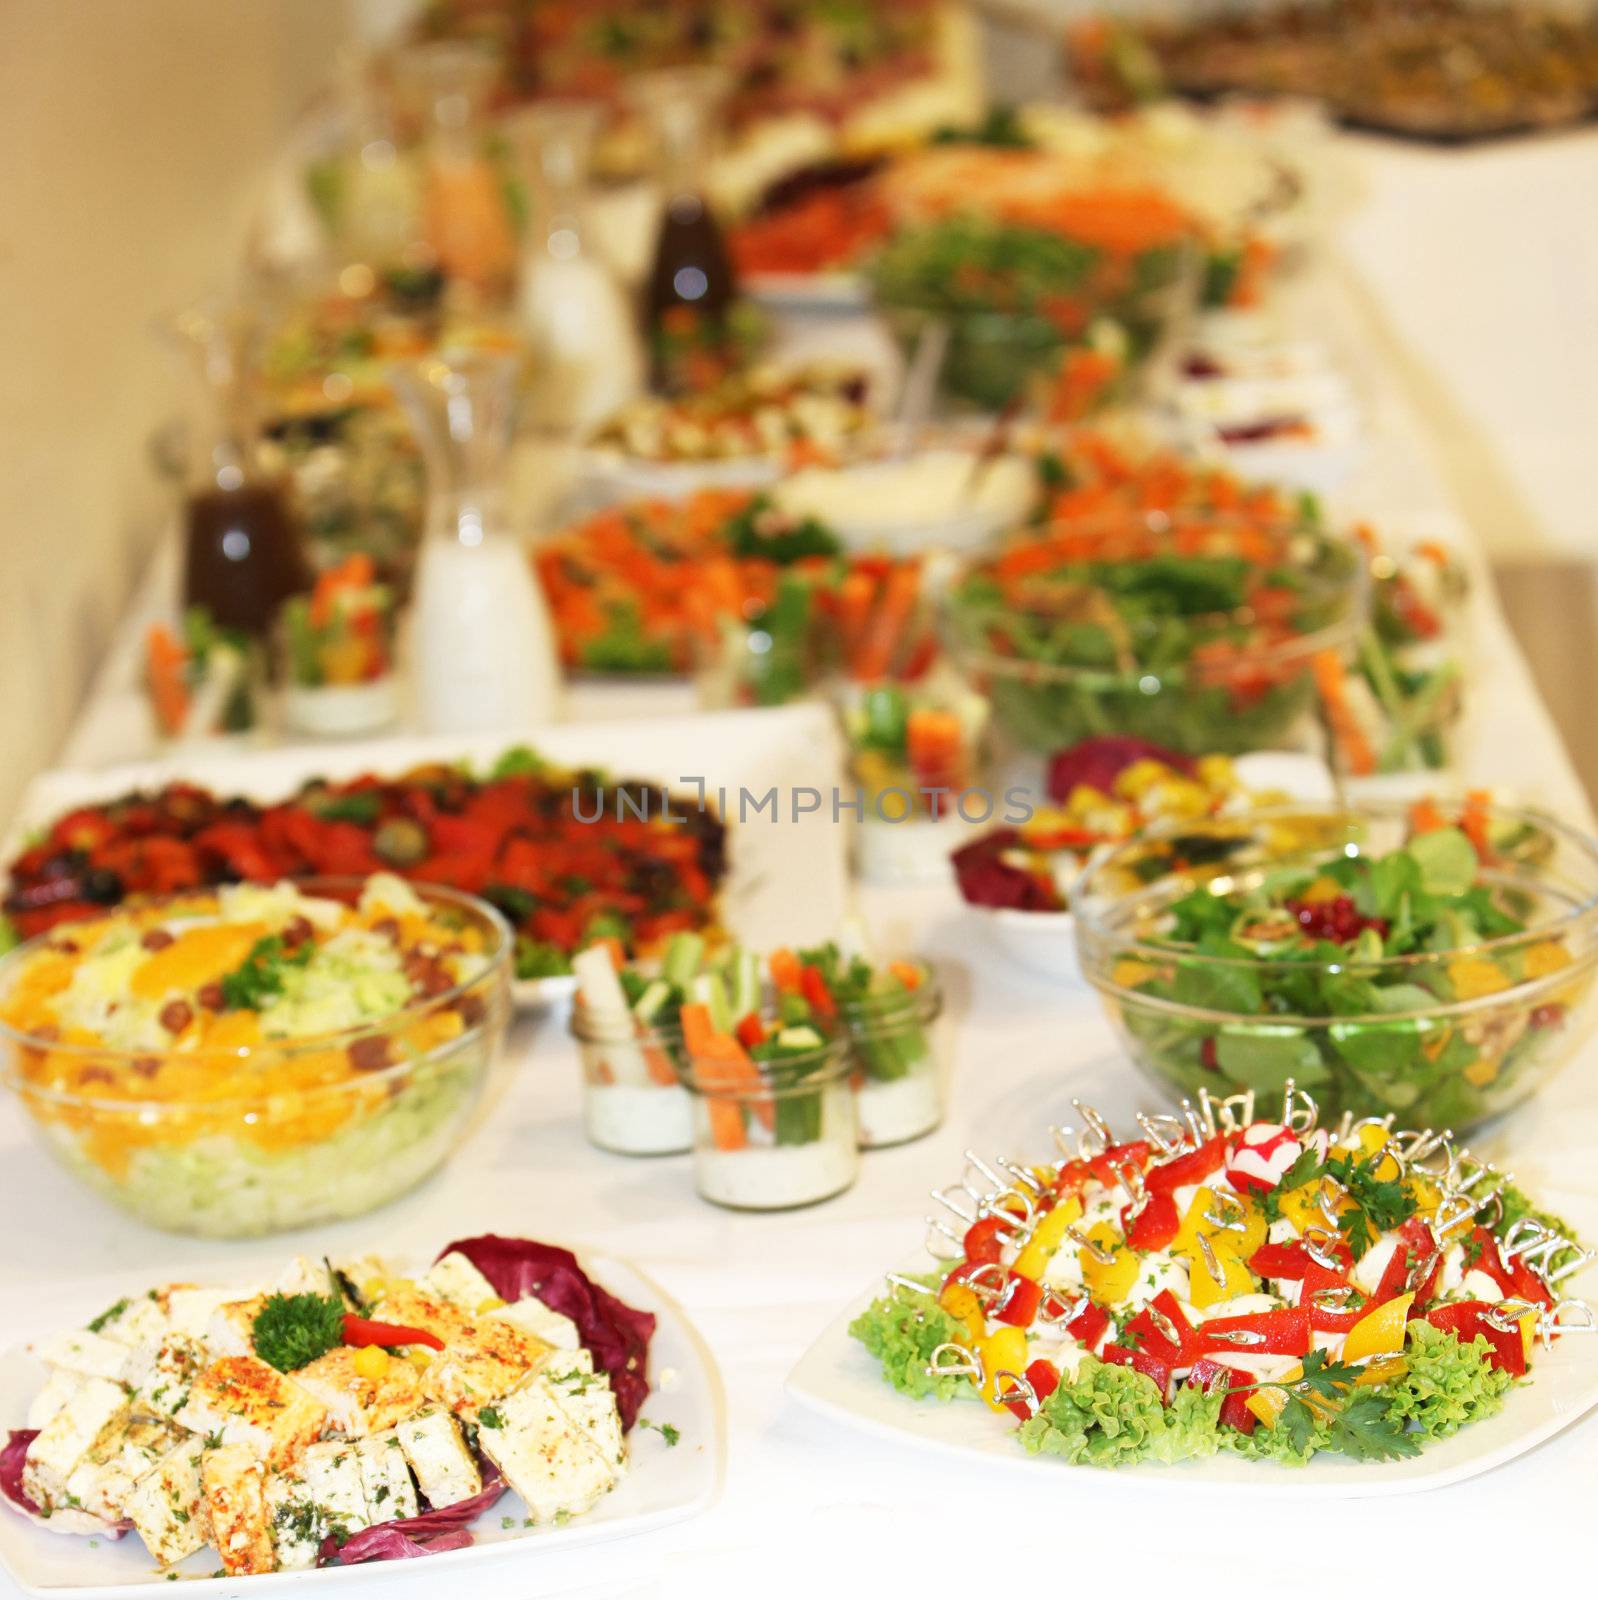 buffet of various dishes by Farina6000